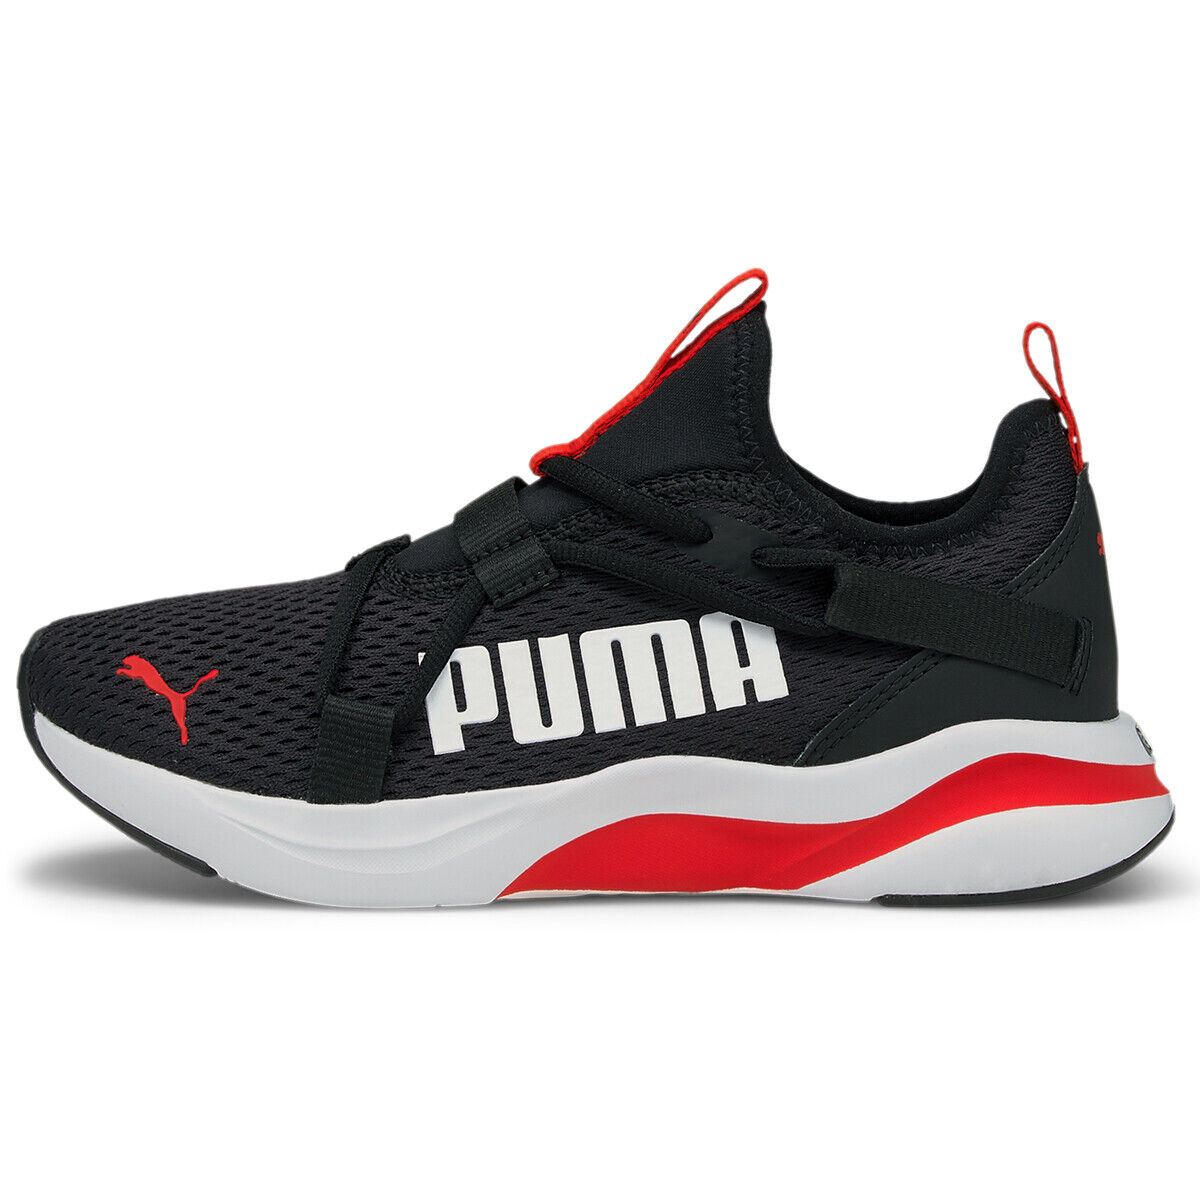 Puma Boys' Softride Max 81% OFF Rift Sneakers Pop Running Max 41% OFF